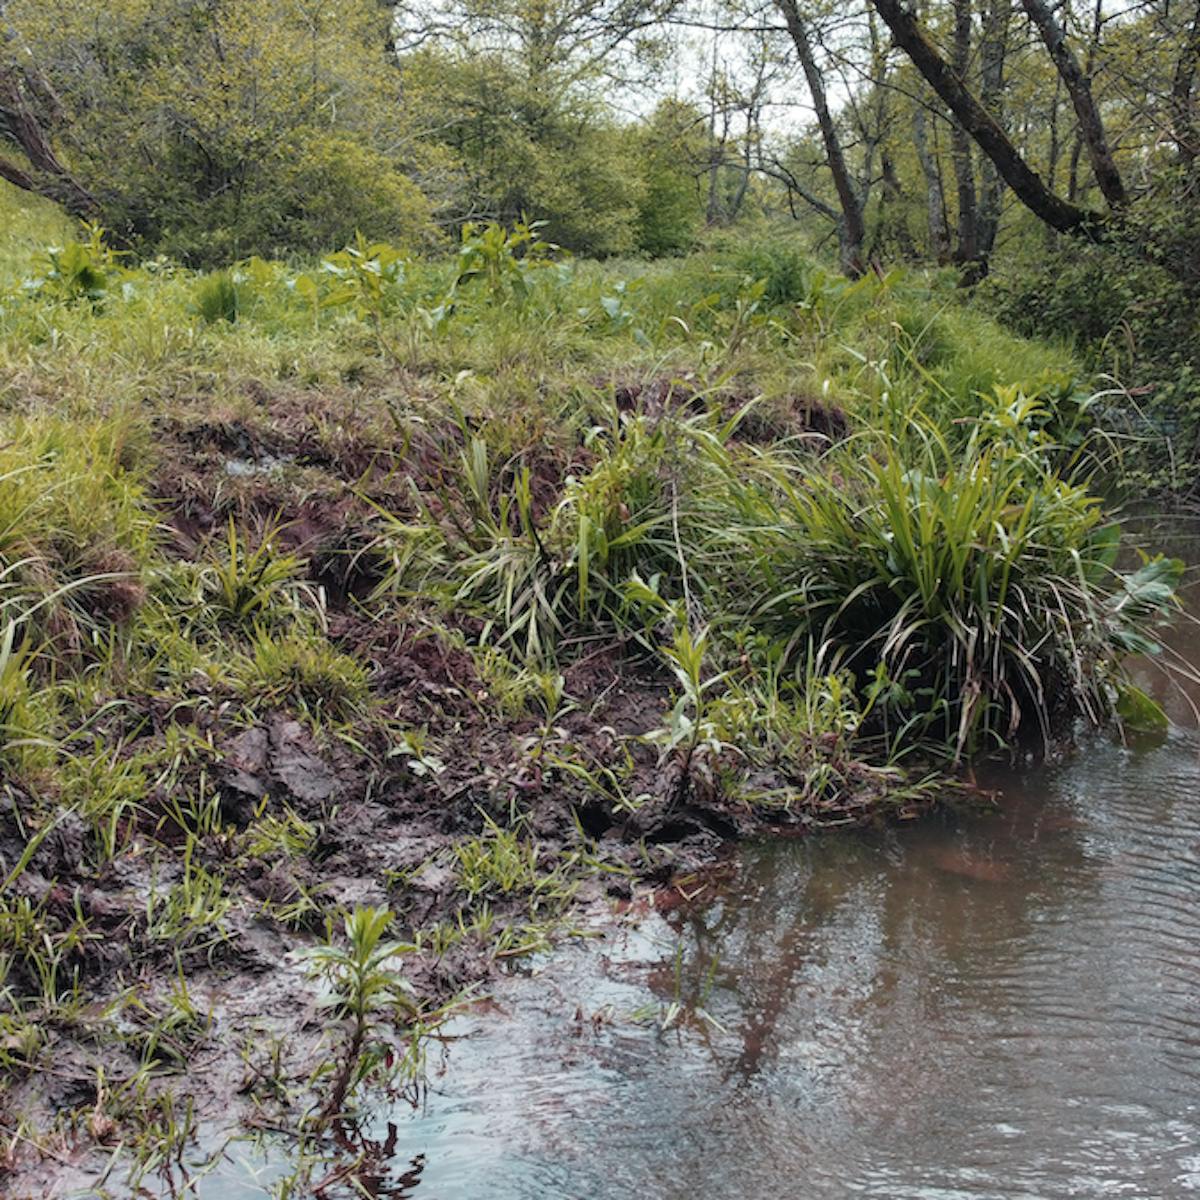 A section of the River Chew which has been affected by livestock trampling on the riverbank.